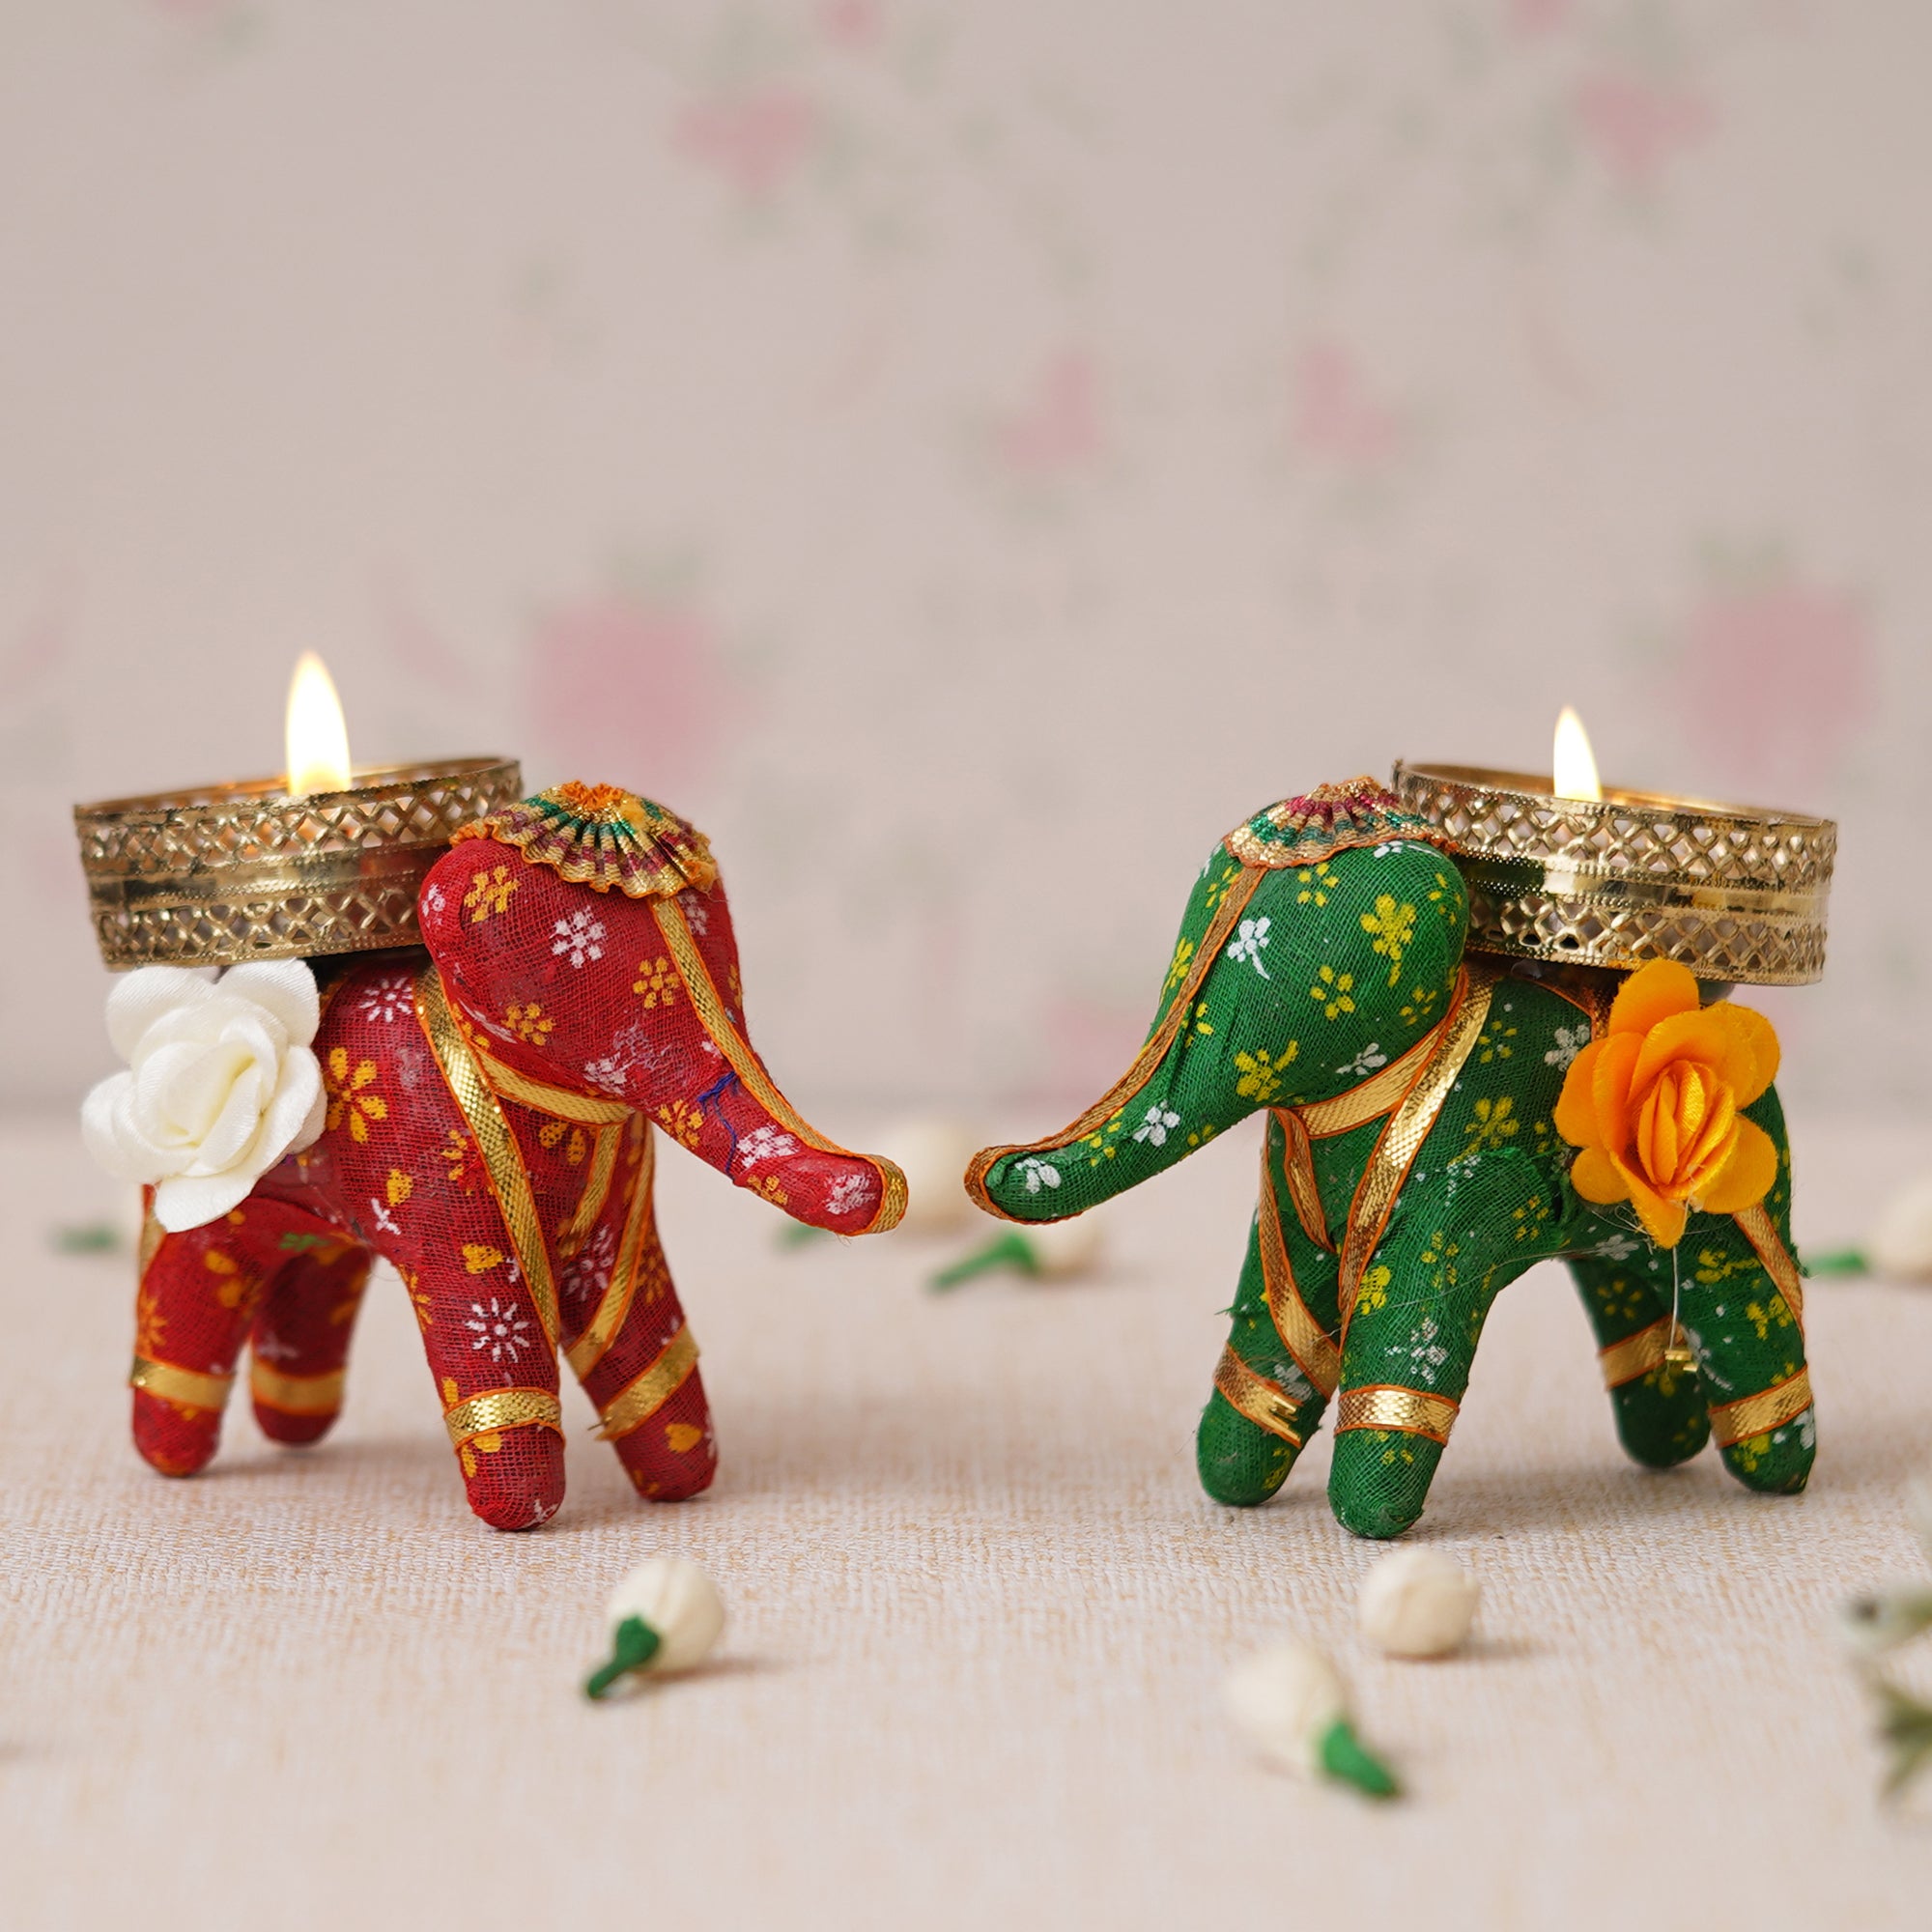 eCraftIndia Red and Green Elephant Decorative Tea Light Candle Holders (Set of 2) 5